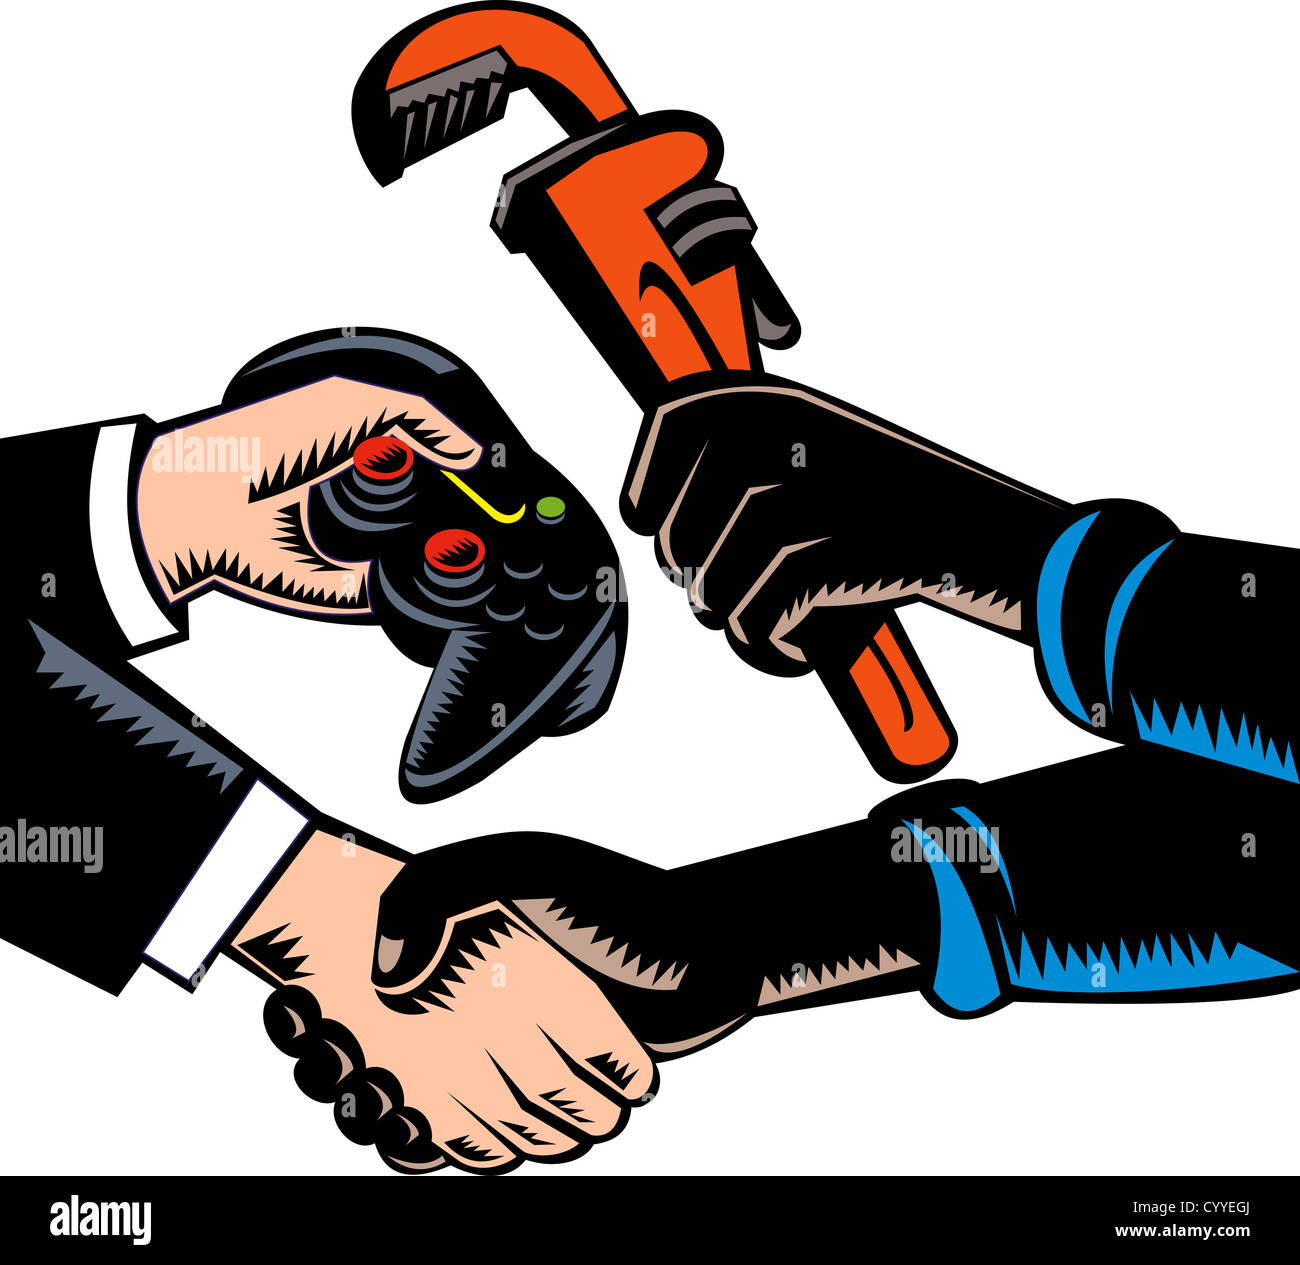 Illustration of hands exchanging bartering swapping plumbing service adjustable wrench with game controller woodcut style. Stock Photo